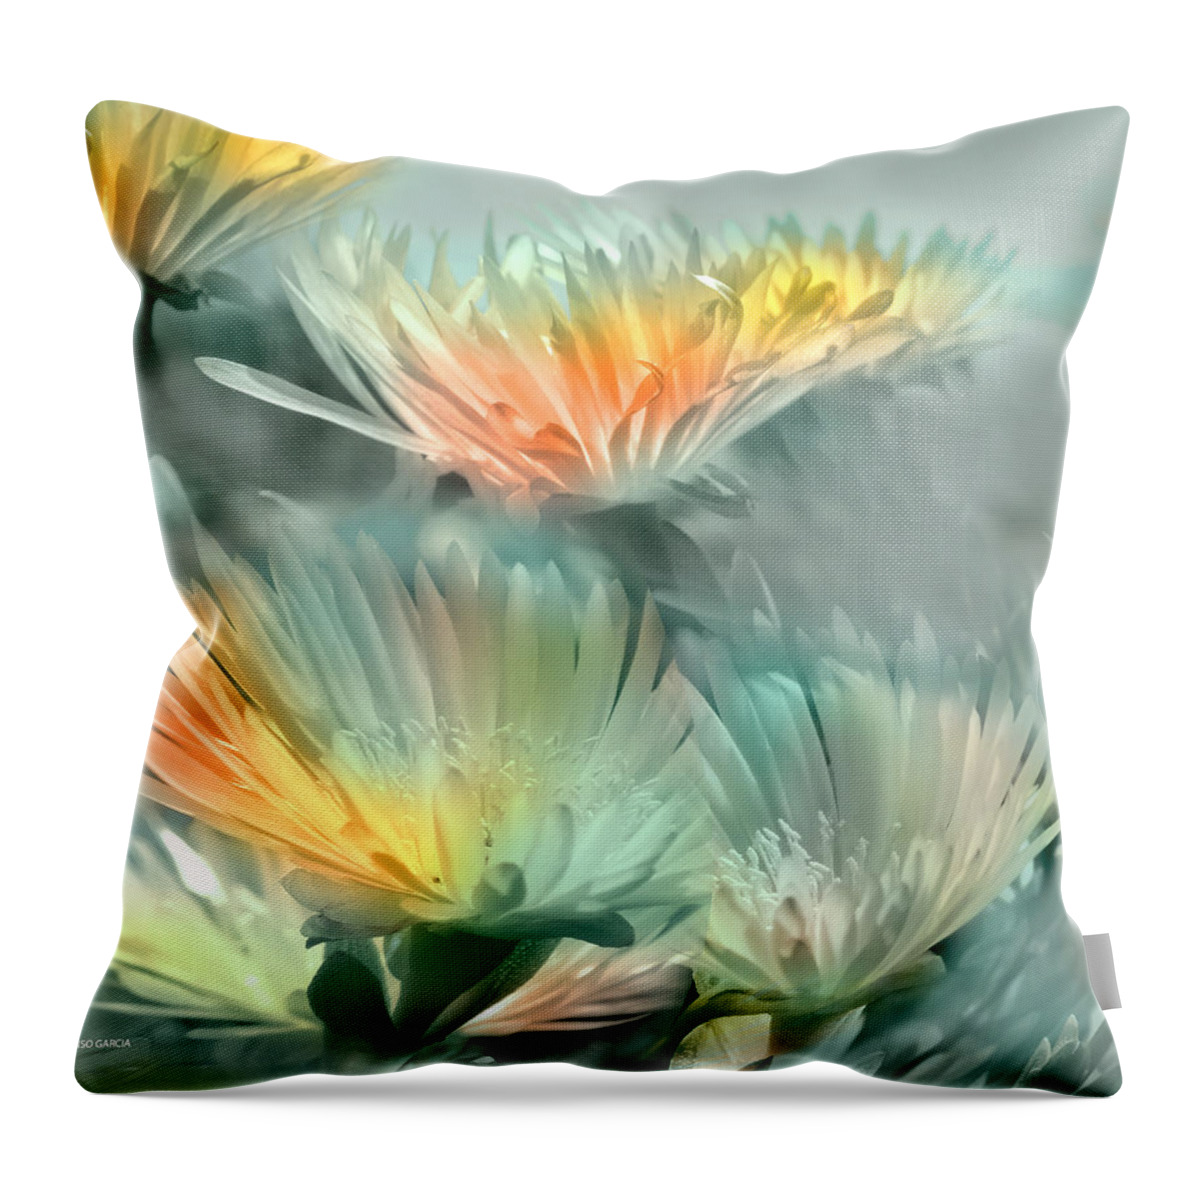 Flowers Photos Throw Pillow featuring the photograph Fiesta Floral #2 by Alfonso Garcia